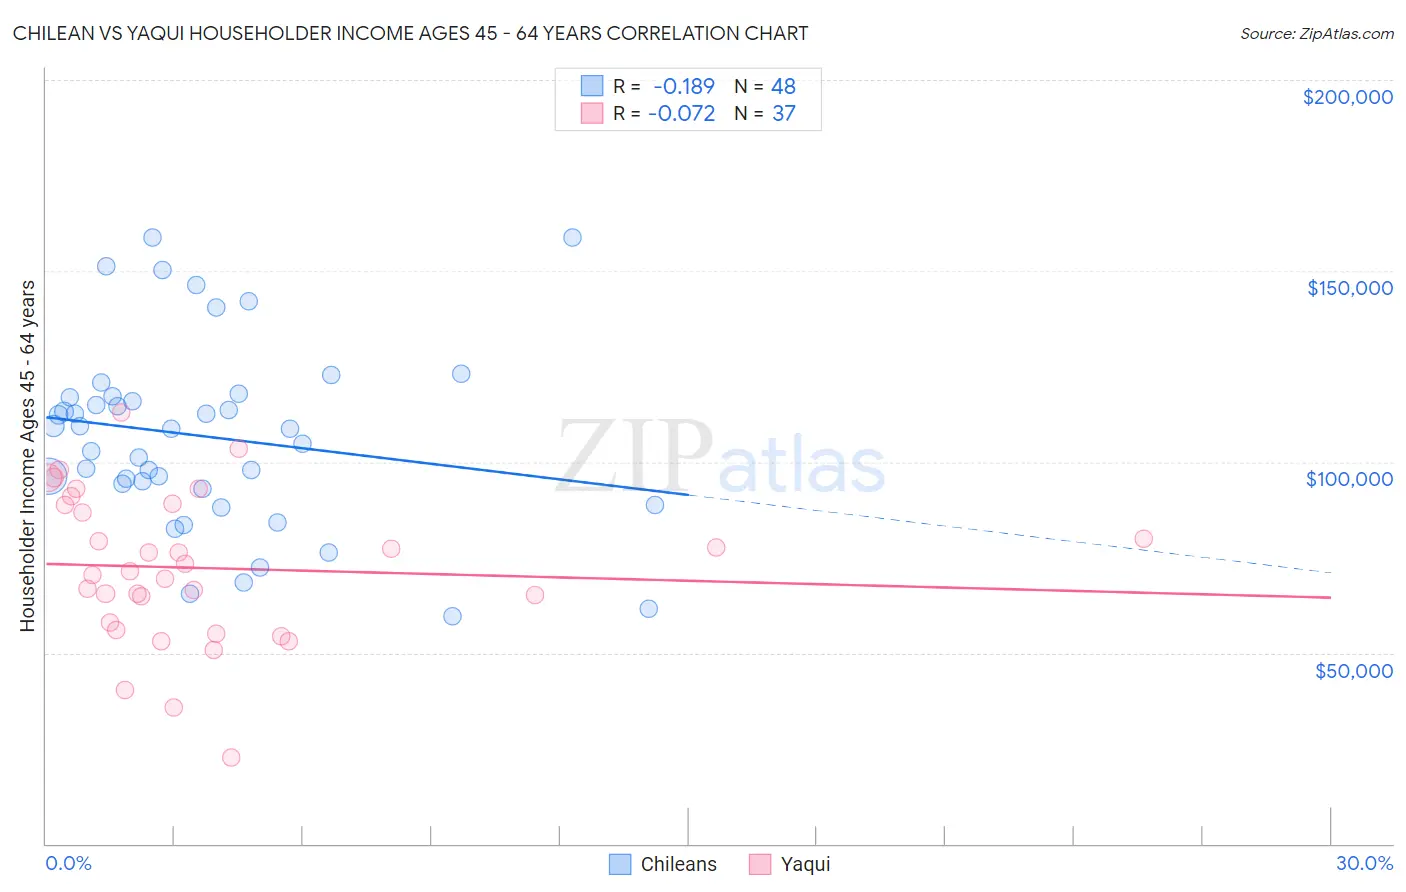 Chilean vs Yaqui Householder Income Ages 45 - 64 years